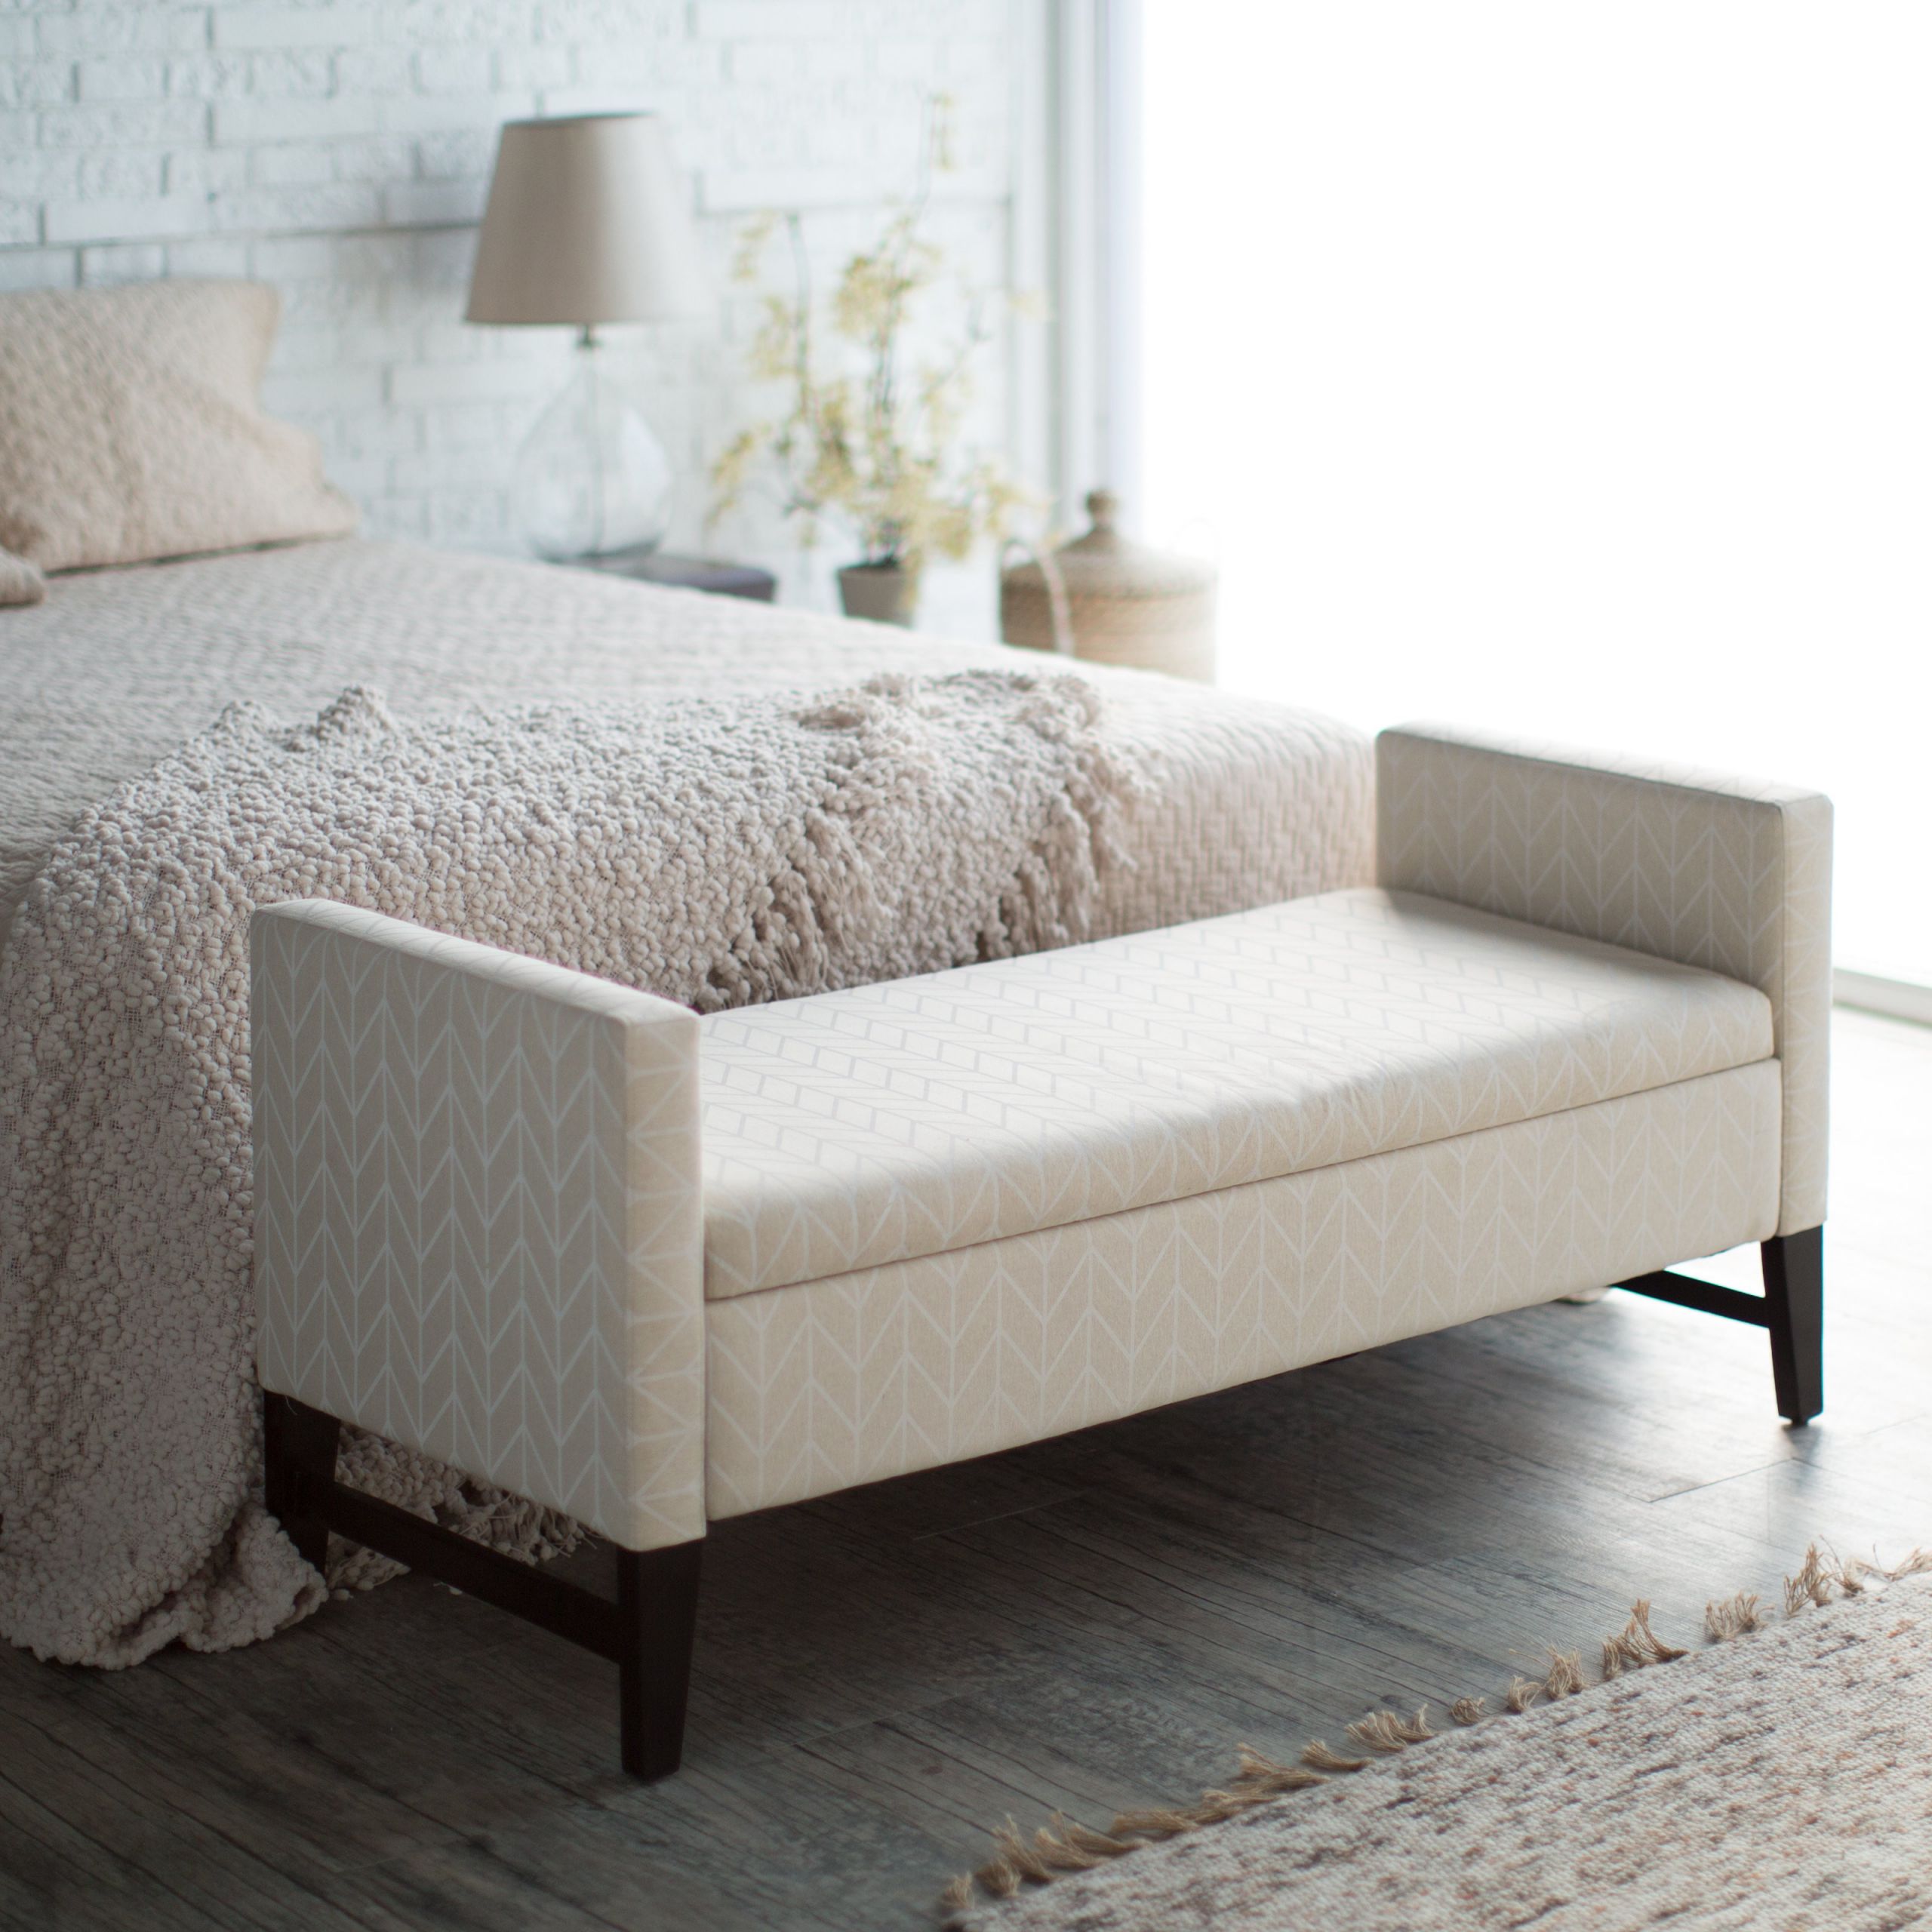 Bedroom Bench With Storage
 Perfect End of Bed Storage Bench – HomesFeed